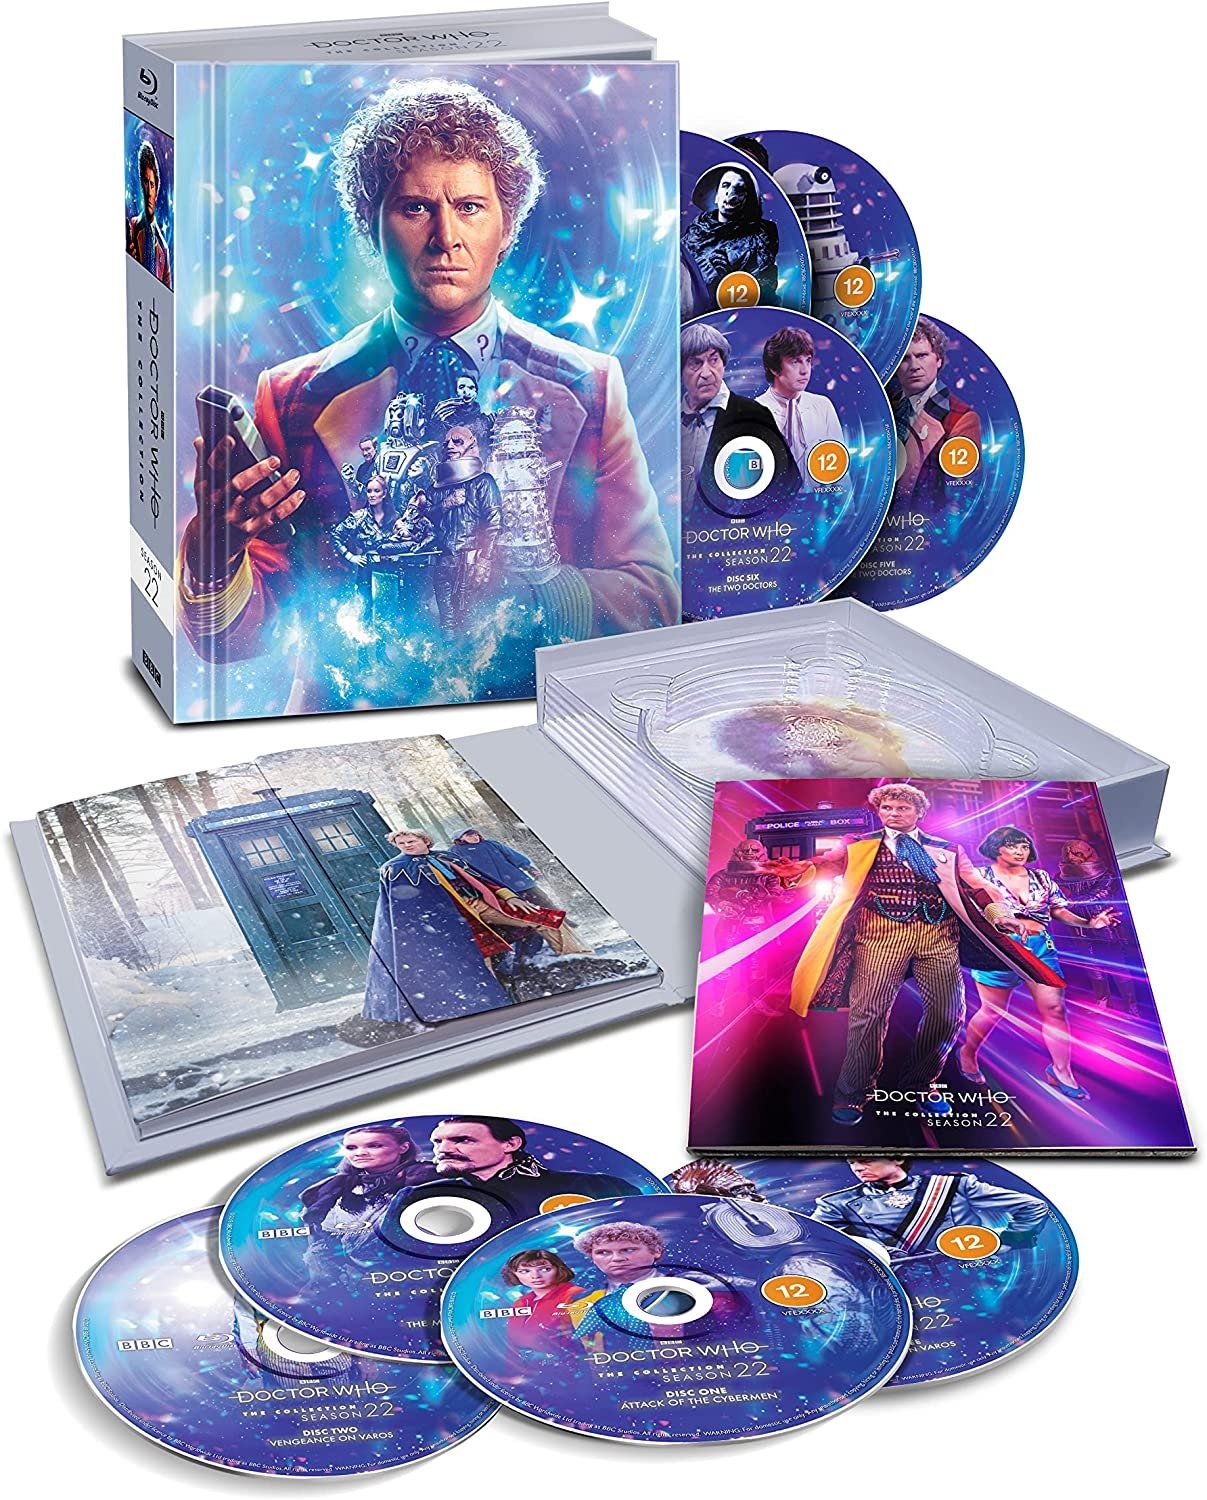 Doctor Who: The Collection Continues with Season 22, Colin Baker’s First Full Series